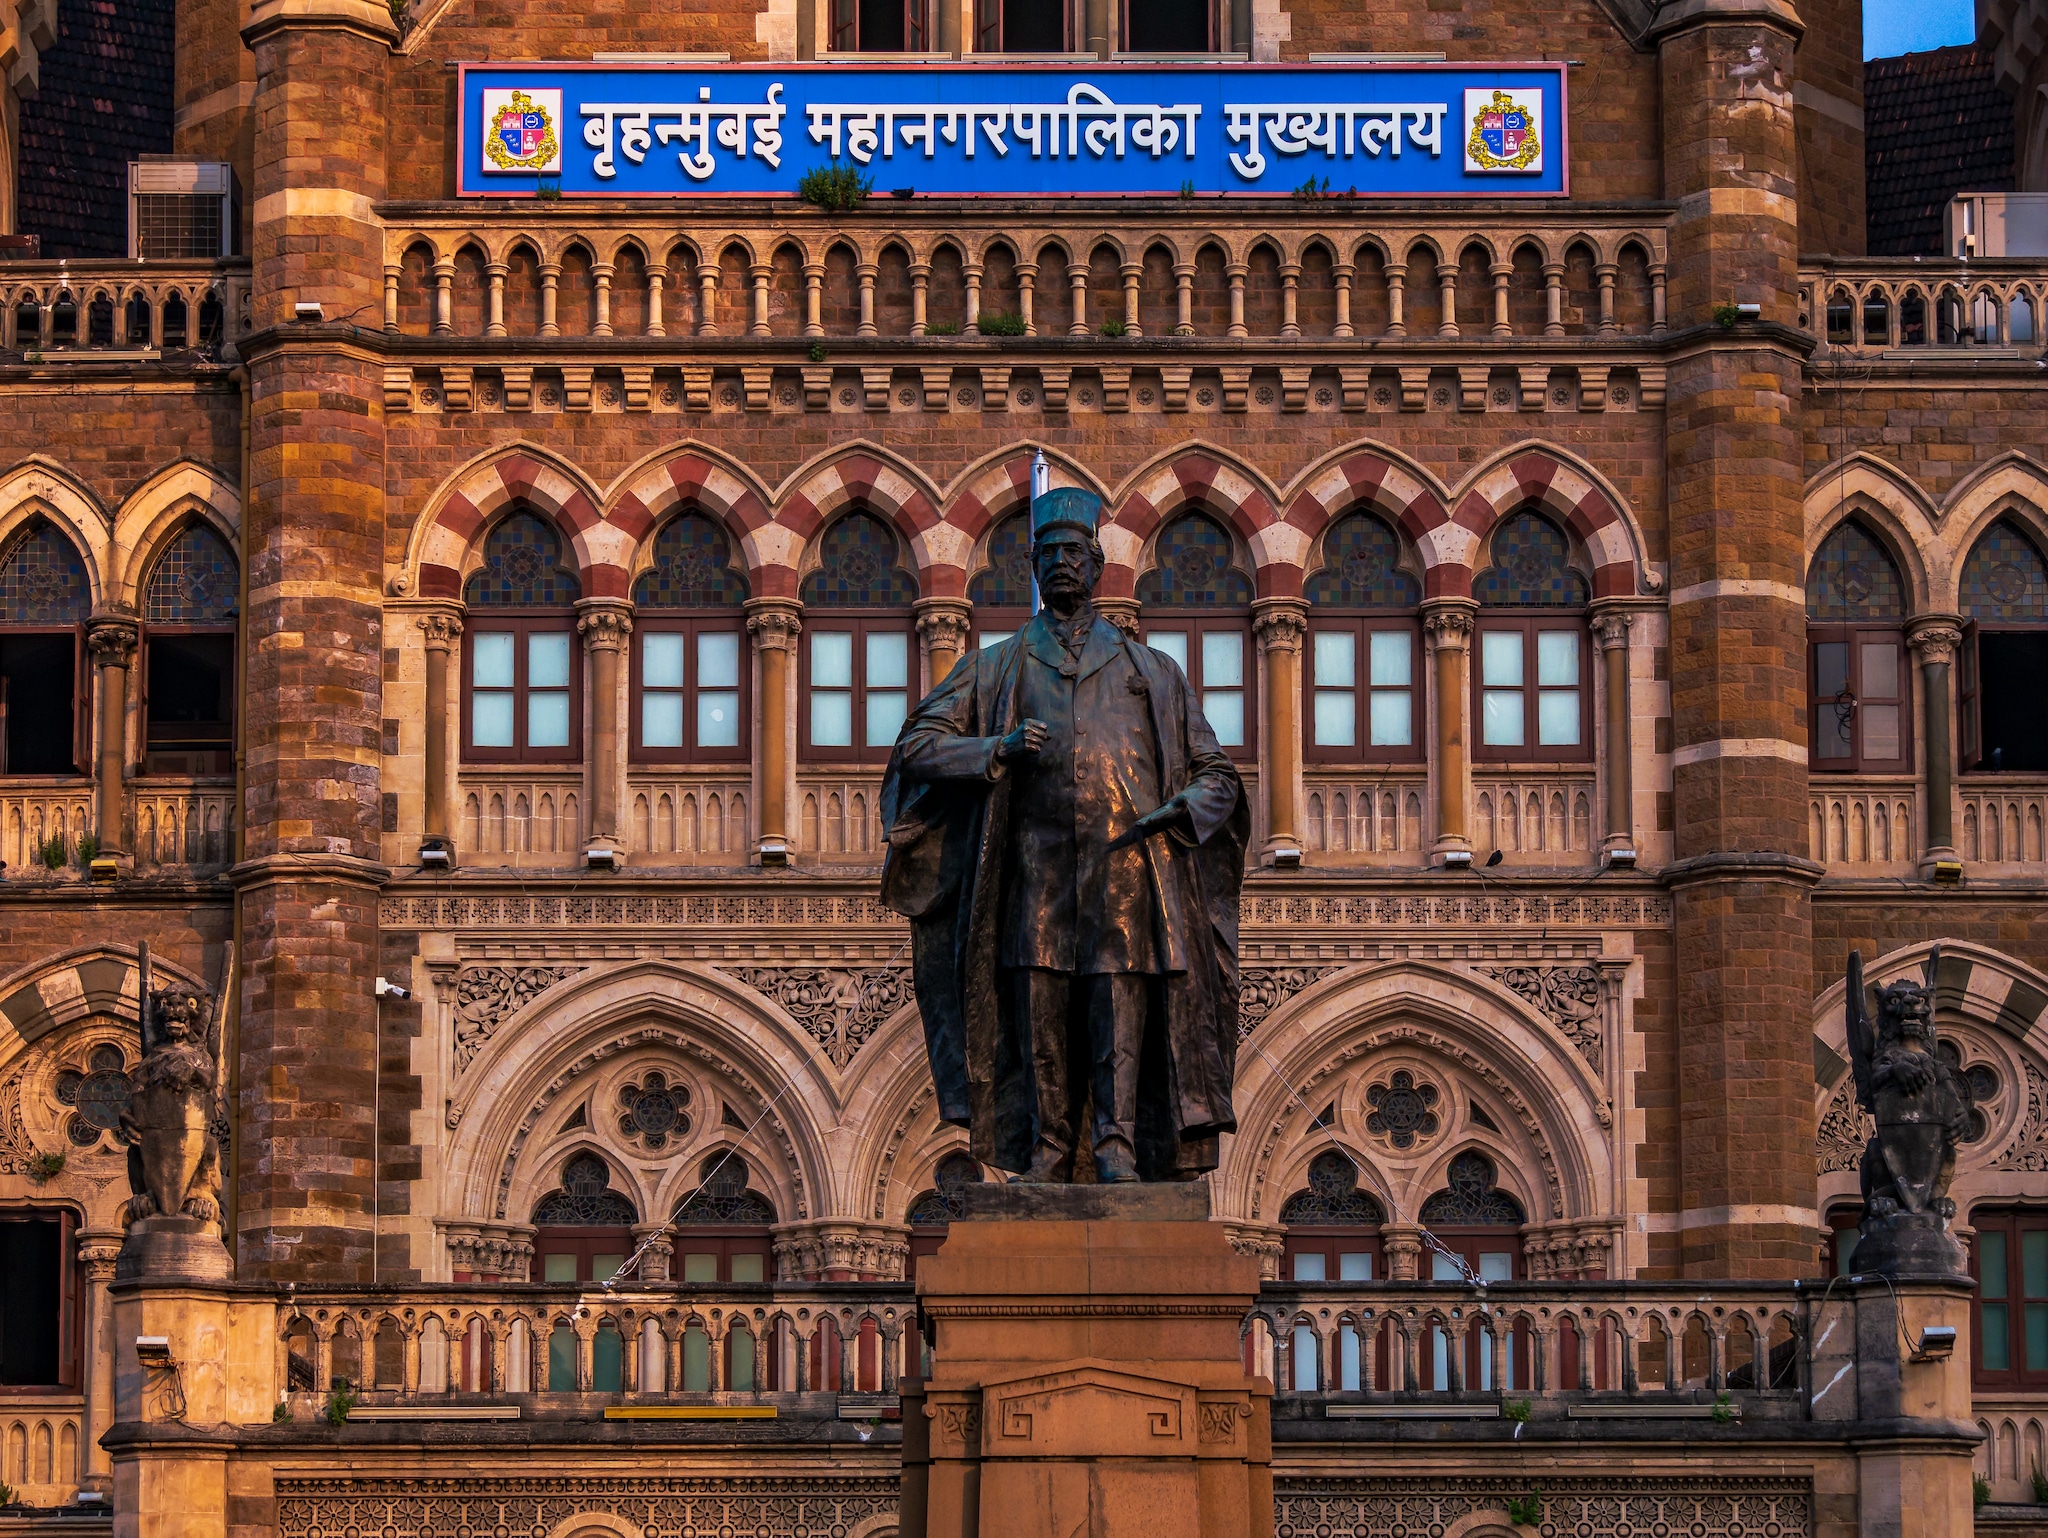 A bronze statue of Sir Pherozeshah Mehta, a notable Indian barrister, stands at the MCGM's entrance. (Image: Shutterstock)